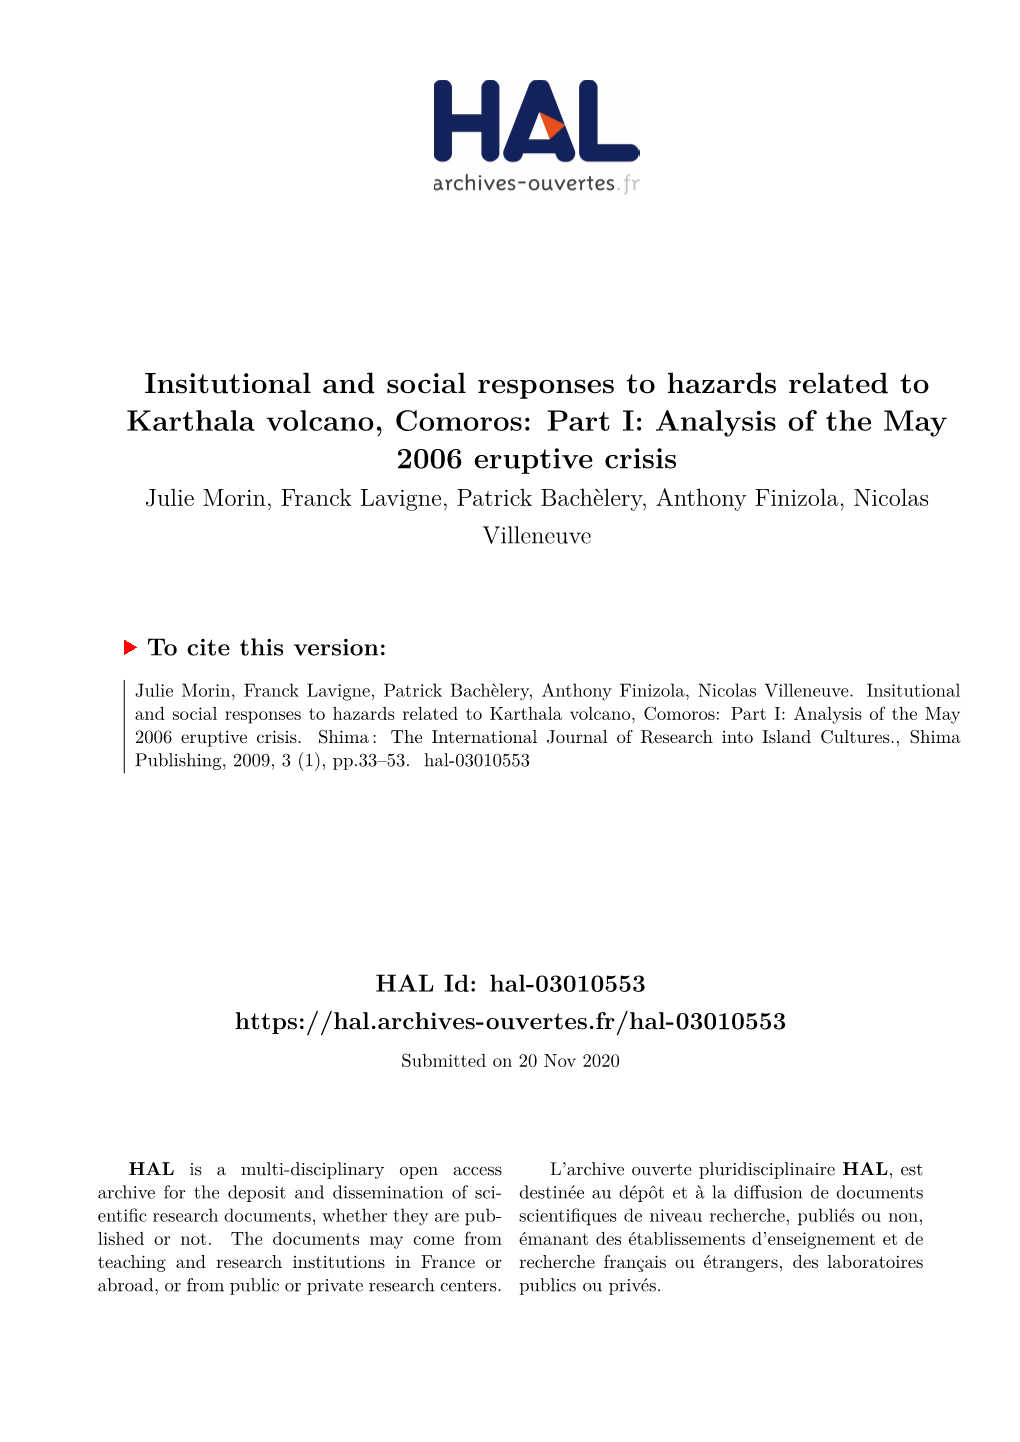 Insitutional and Social Responses to Hazards Related to Karthala Volcano, Comoros: Part I: Analysis of the May 2006 Eruptive